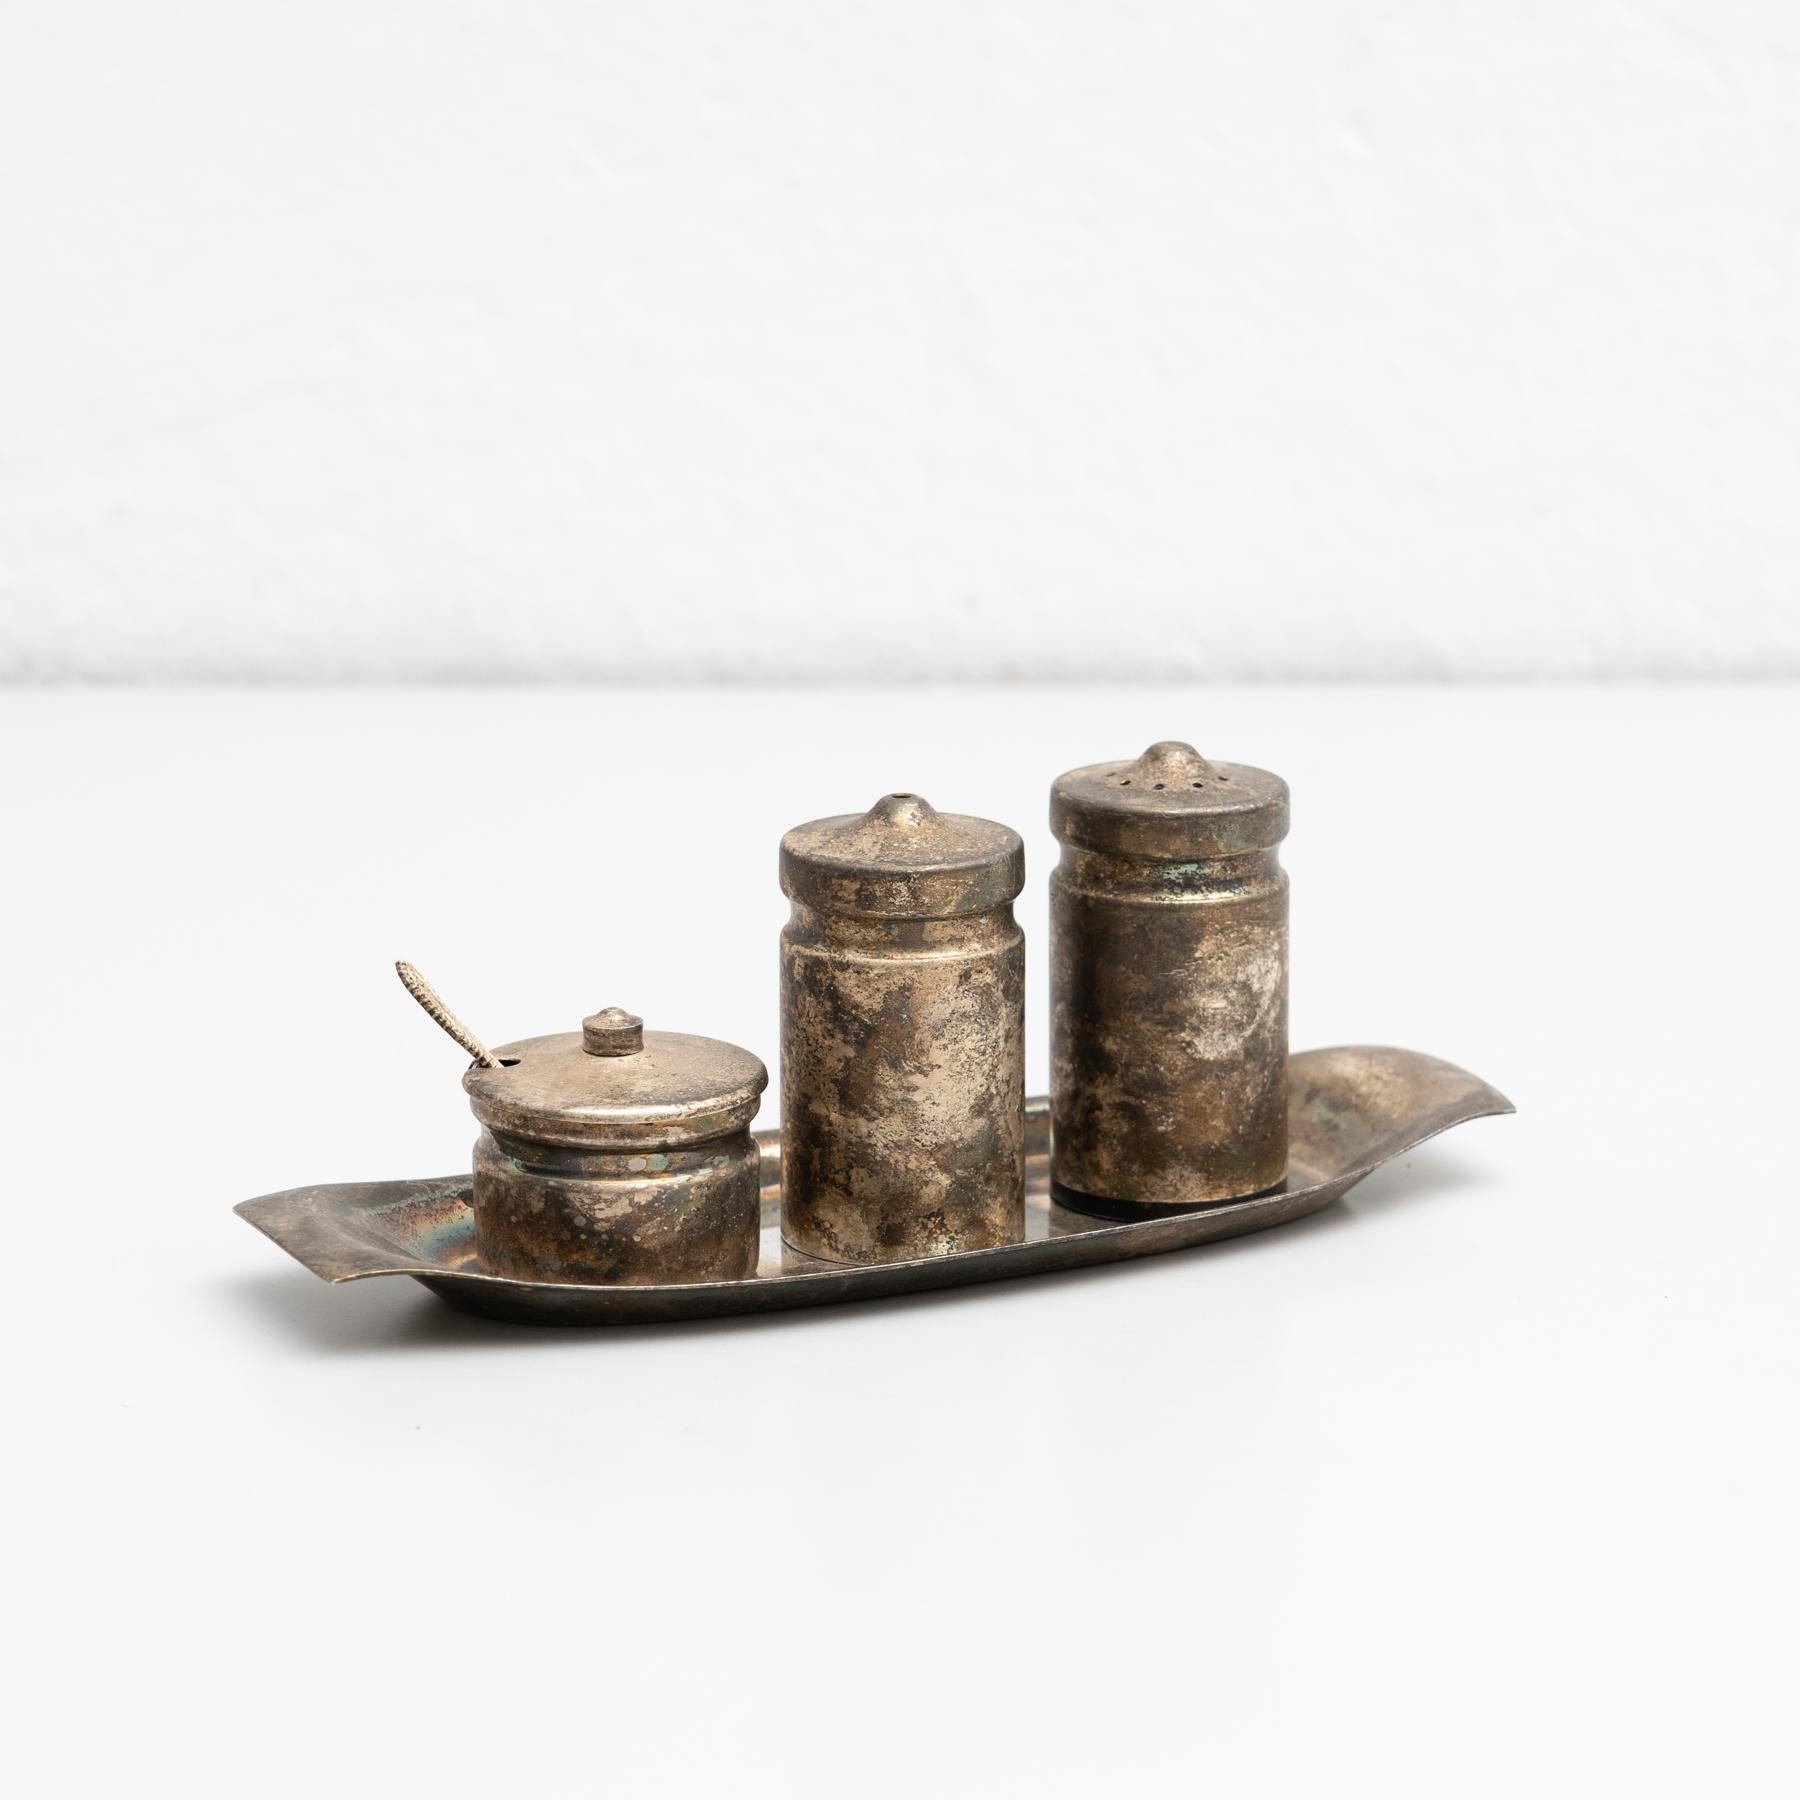 Antique Catalan metal cruet set.

Manufactured in Spain, circa 1940

In original condition, with minor wear consistent of age and use, preserving a beautiful patina.

Material:
Metal.